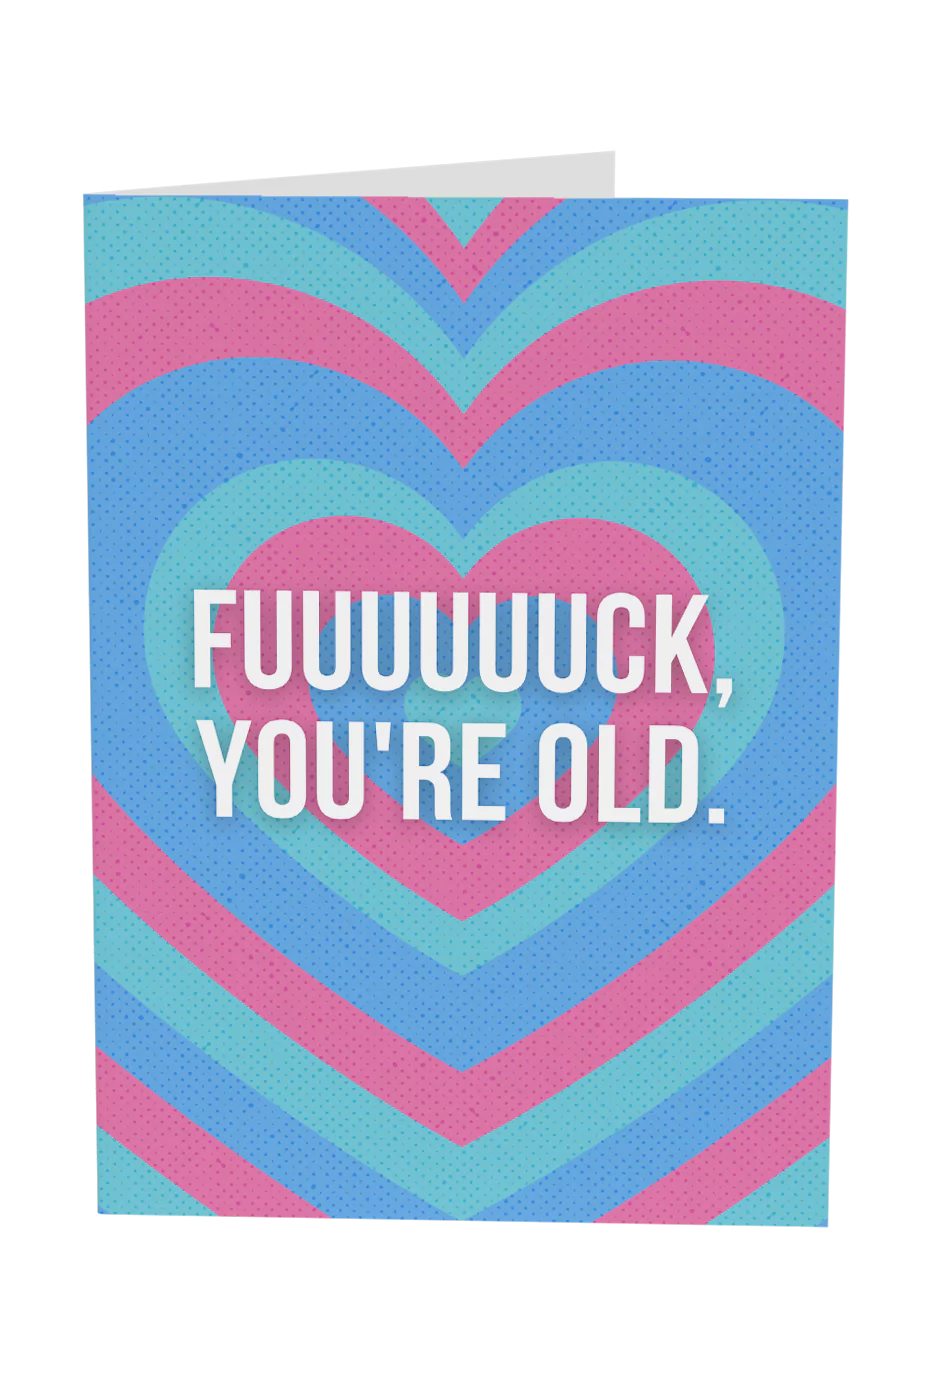 You're Old